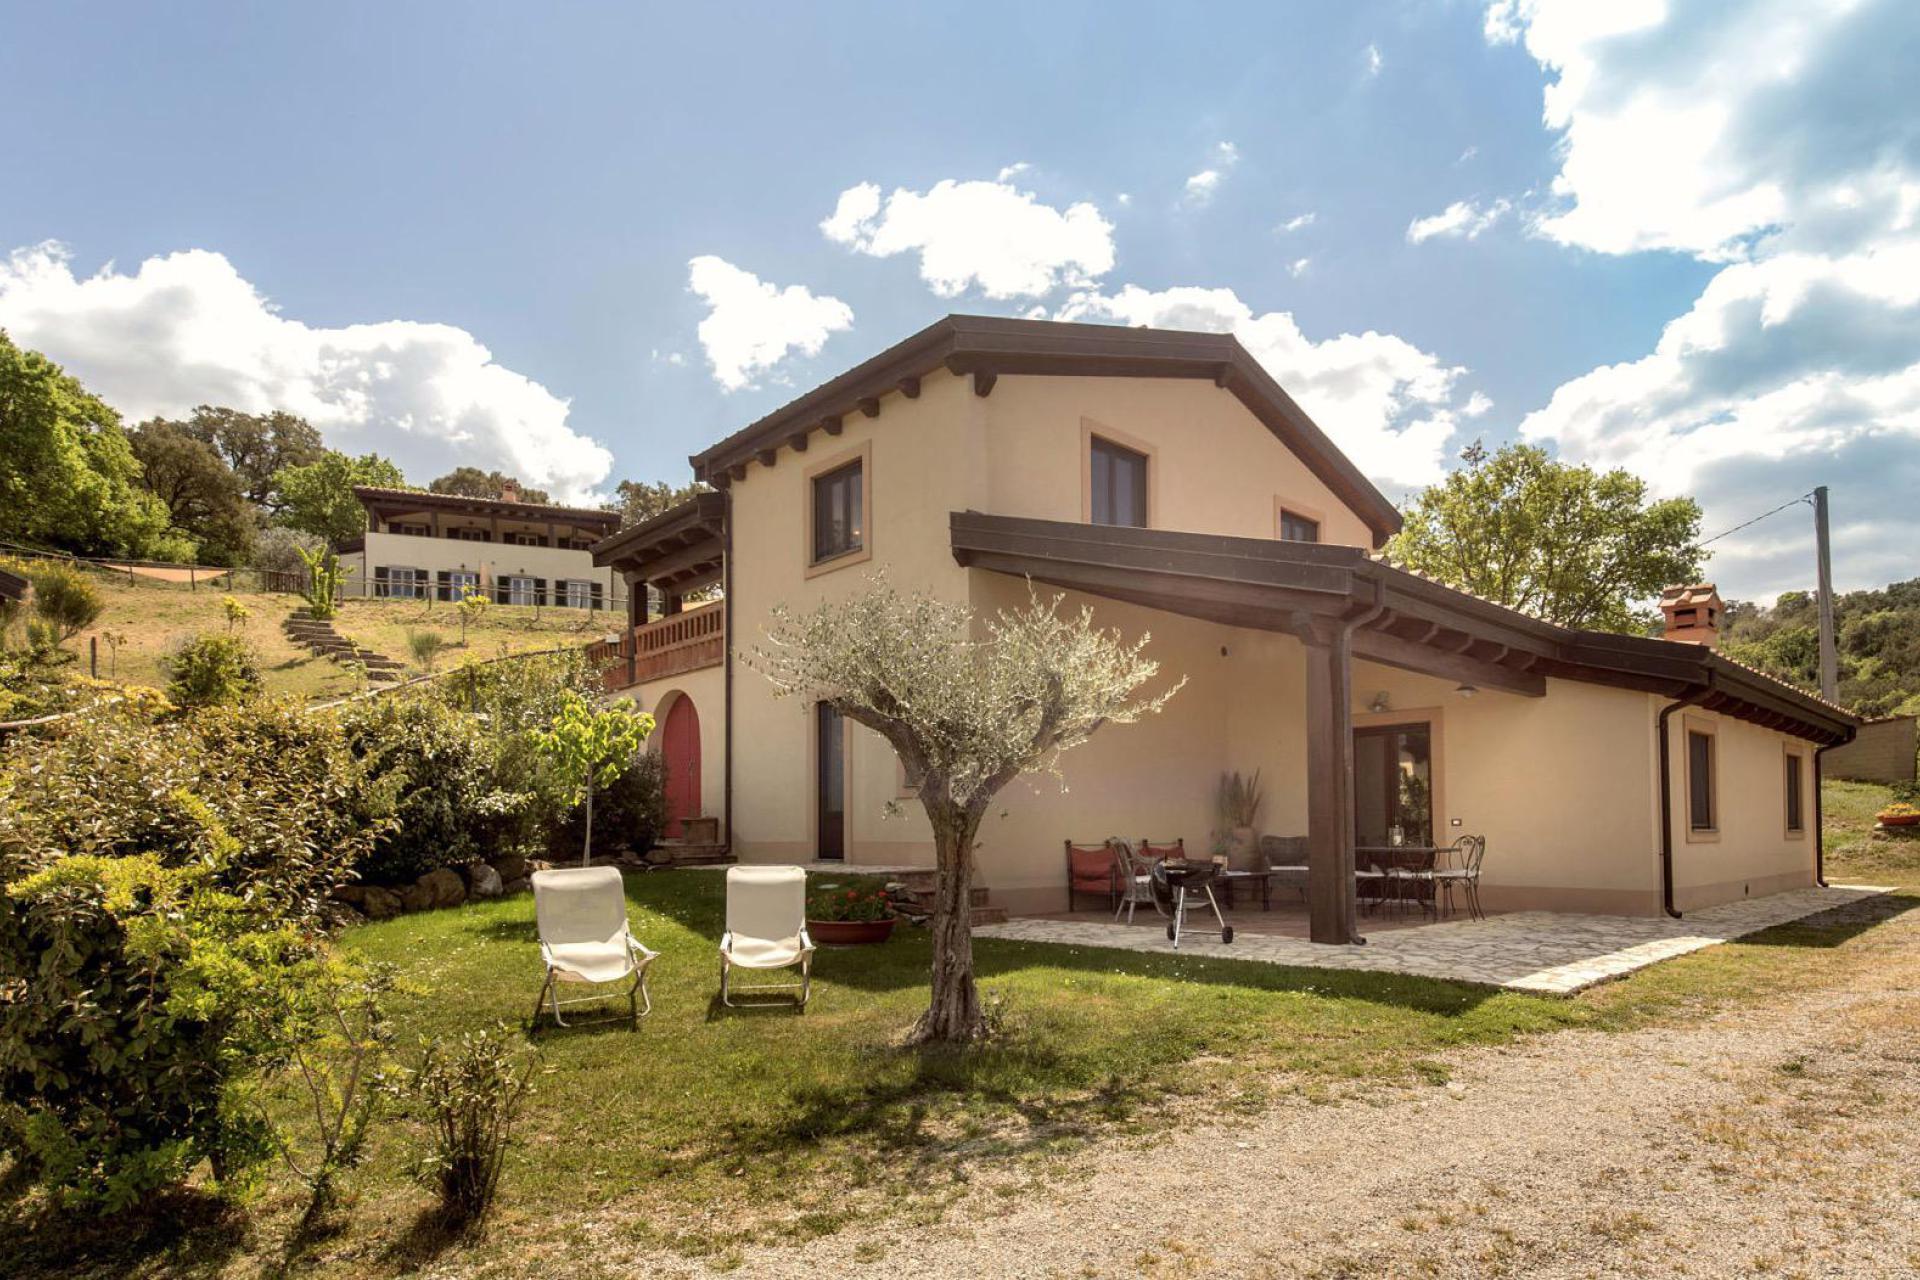 Agriturismo with luxury houses on a hill in Tuscany